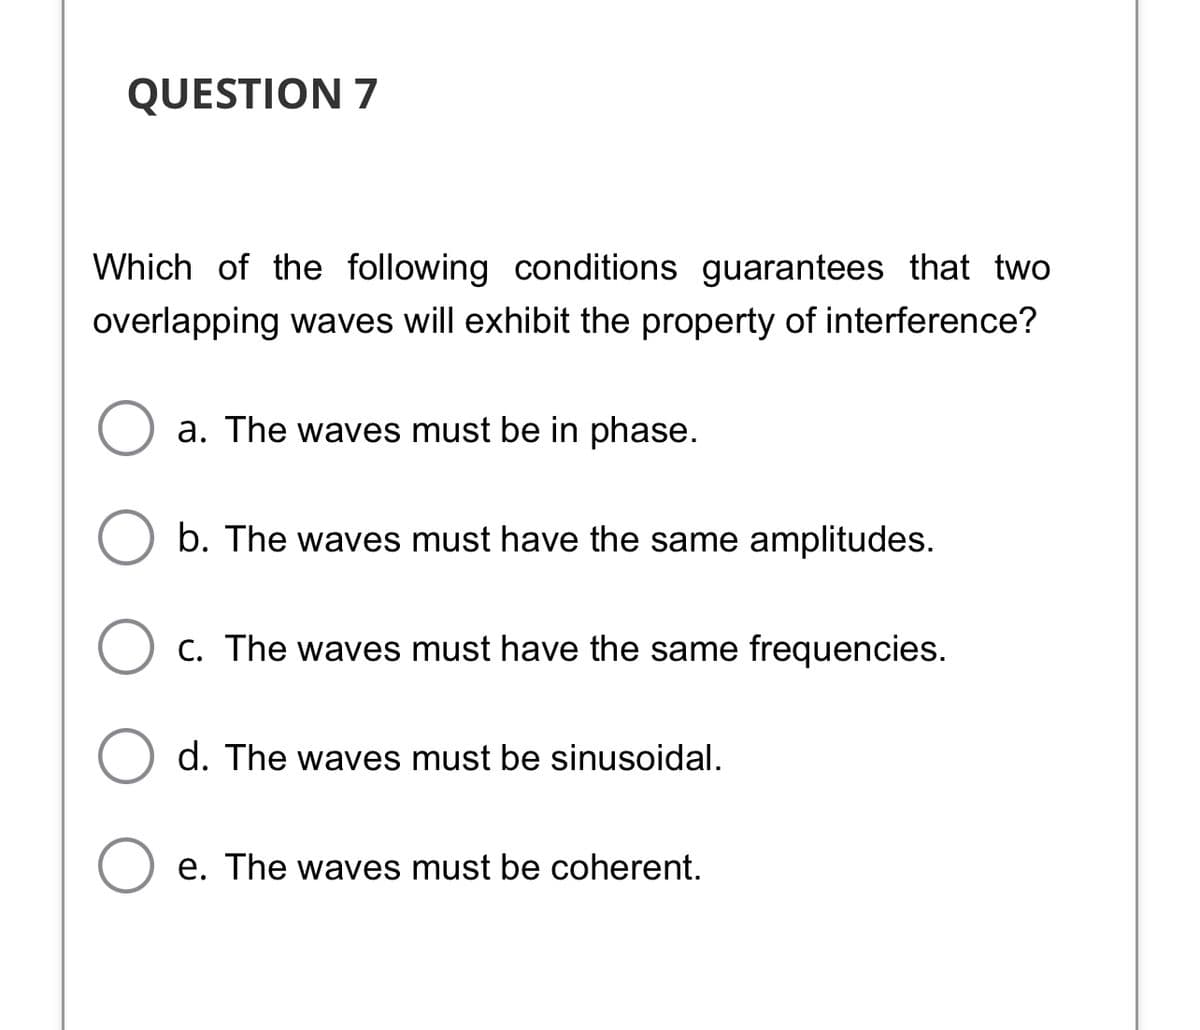 QUESTION 7
Which of the following conditions guarantees that two
overlapping waves will exhibit the property of interference?
a. The waves must be in phase.
b. The waves must have the same amplitudes.
C. The waves must have the same frequencies.
d. The waves must be sinusoidal.
e. The waves must be coherent.
